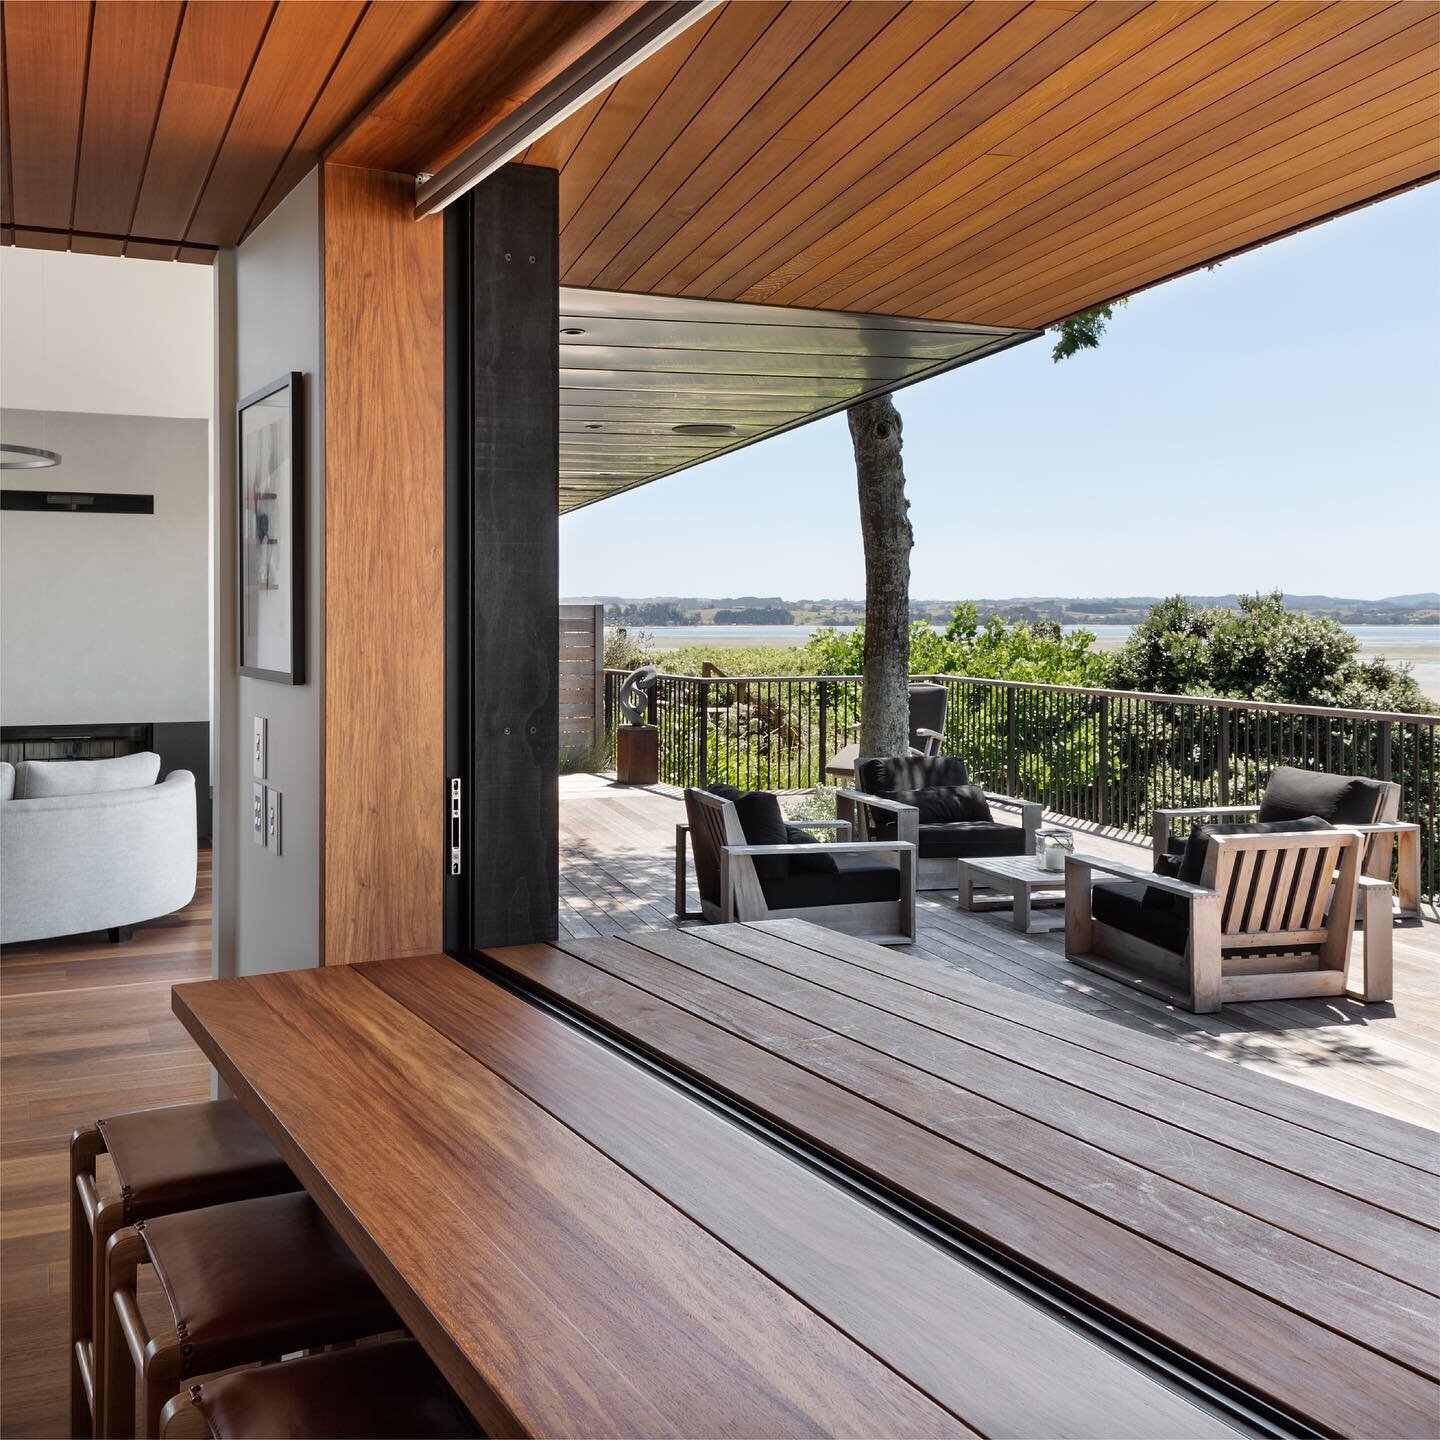 Seaside Barn &mdash; Kitchen servery window framed in rosewood timber offering views of the Manukau Harbour.